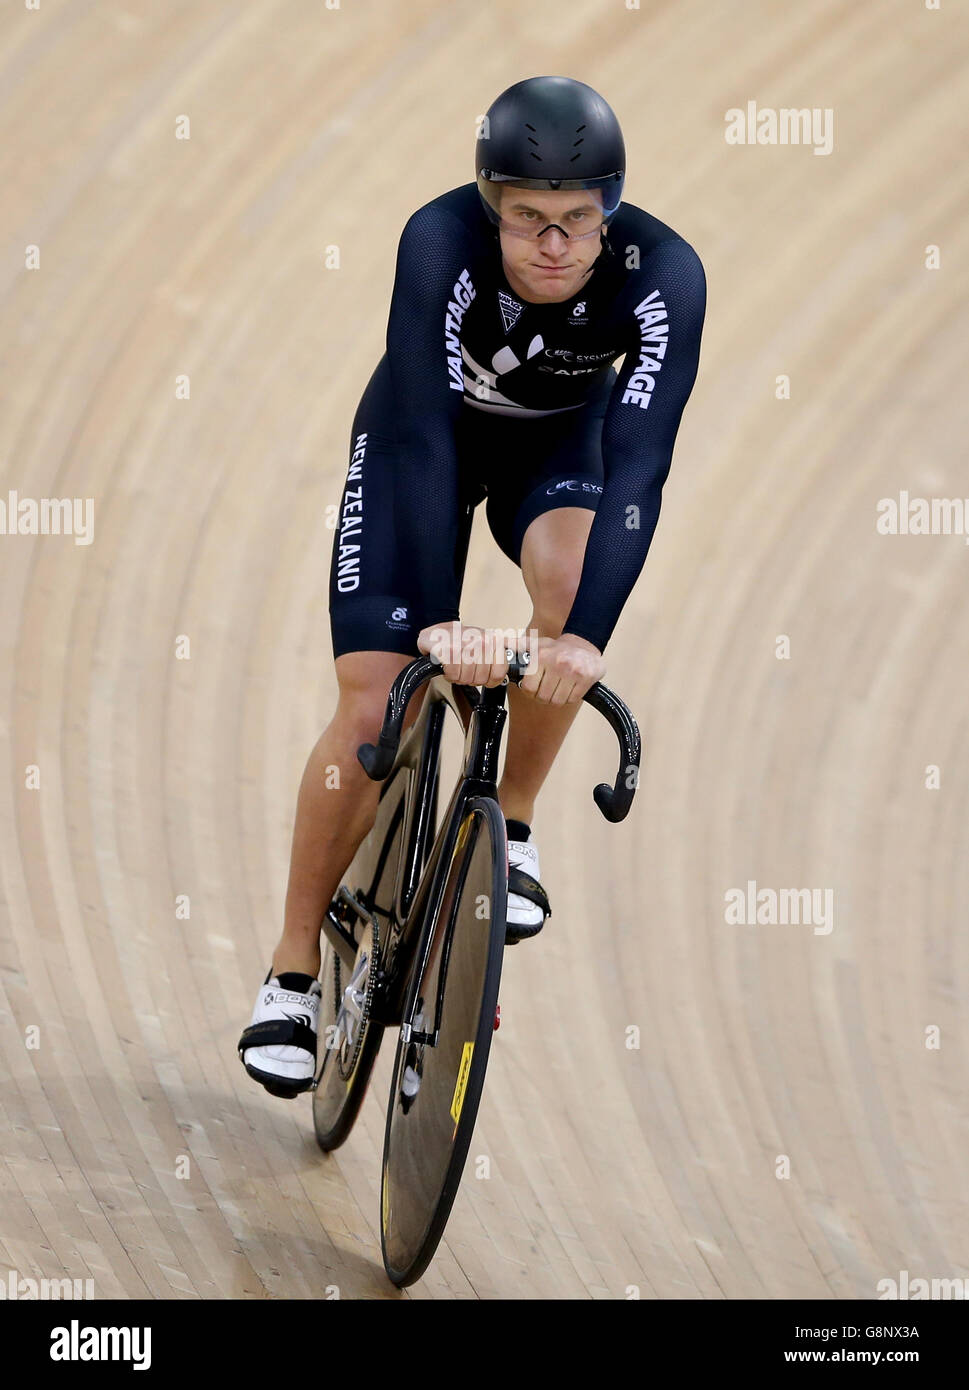 New Zealand's Sam Webster during day three of the UCI Track Cycling World Championships at Lee Valley VeloPark, London. PRESS ASSOCIATION Photo. Picture date: Friday March 4, 2016. See PA story CYCLING World. Photo credit should read: Tim Goode/PA Wire. RESTRICTIONS: , No commercial use without prior permission, please contact PA Images for further information: Tel: +44 (0) 115 8447447. Stock Photo